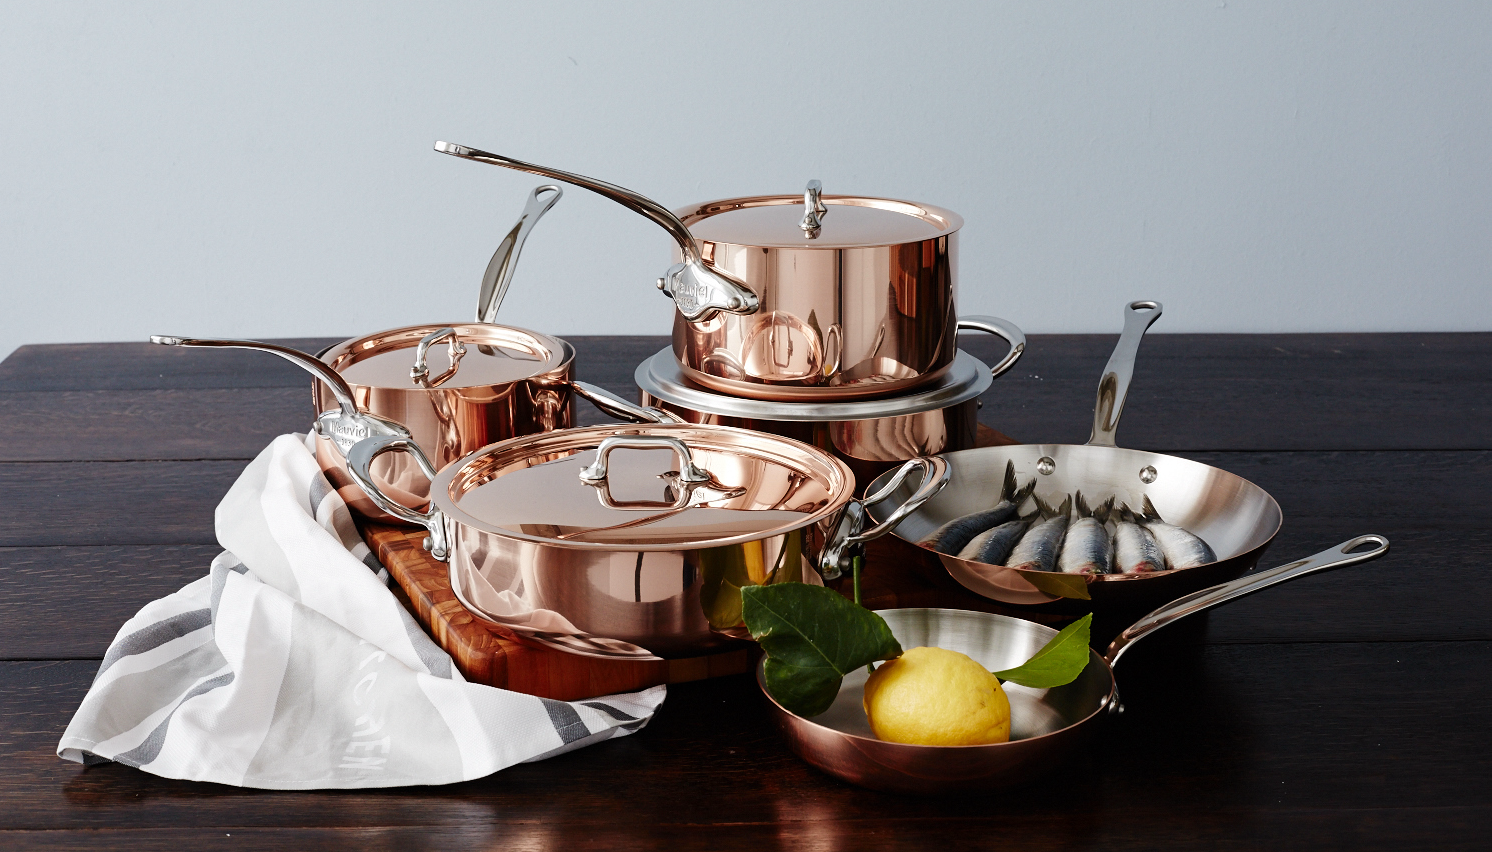 How to Choose a Copper Saucepan (& Why)